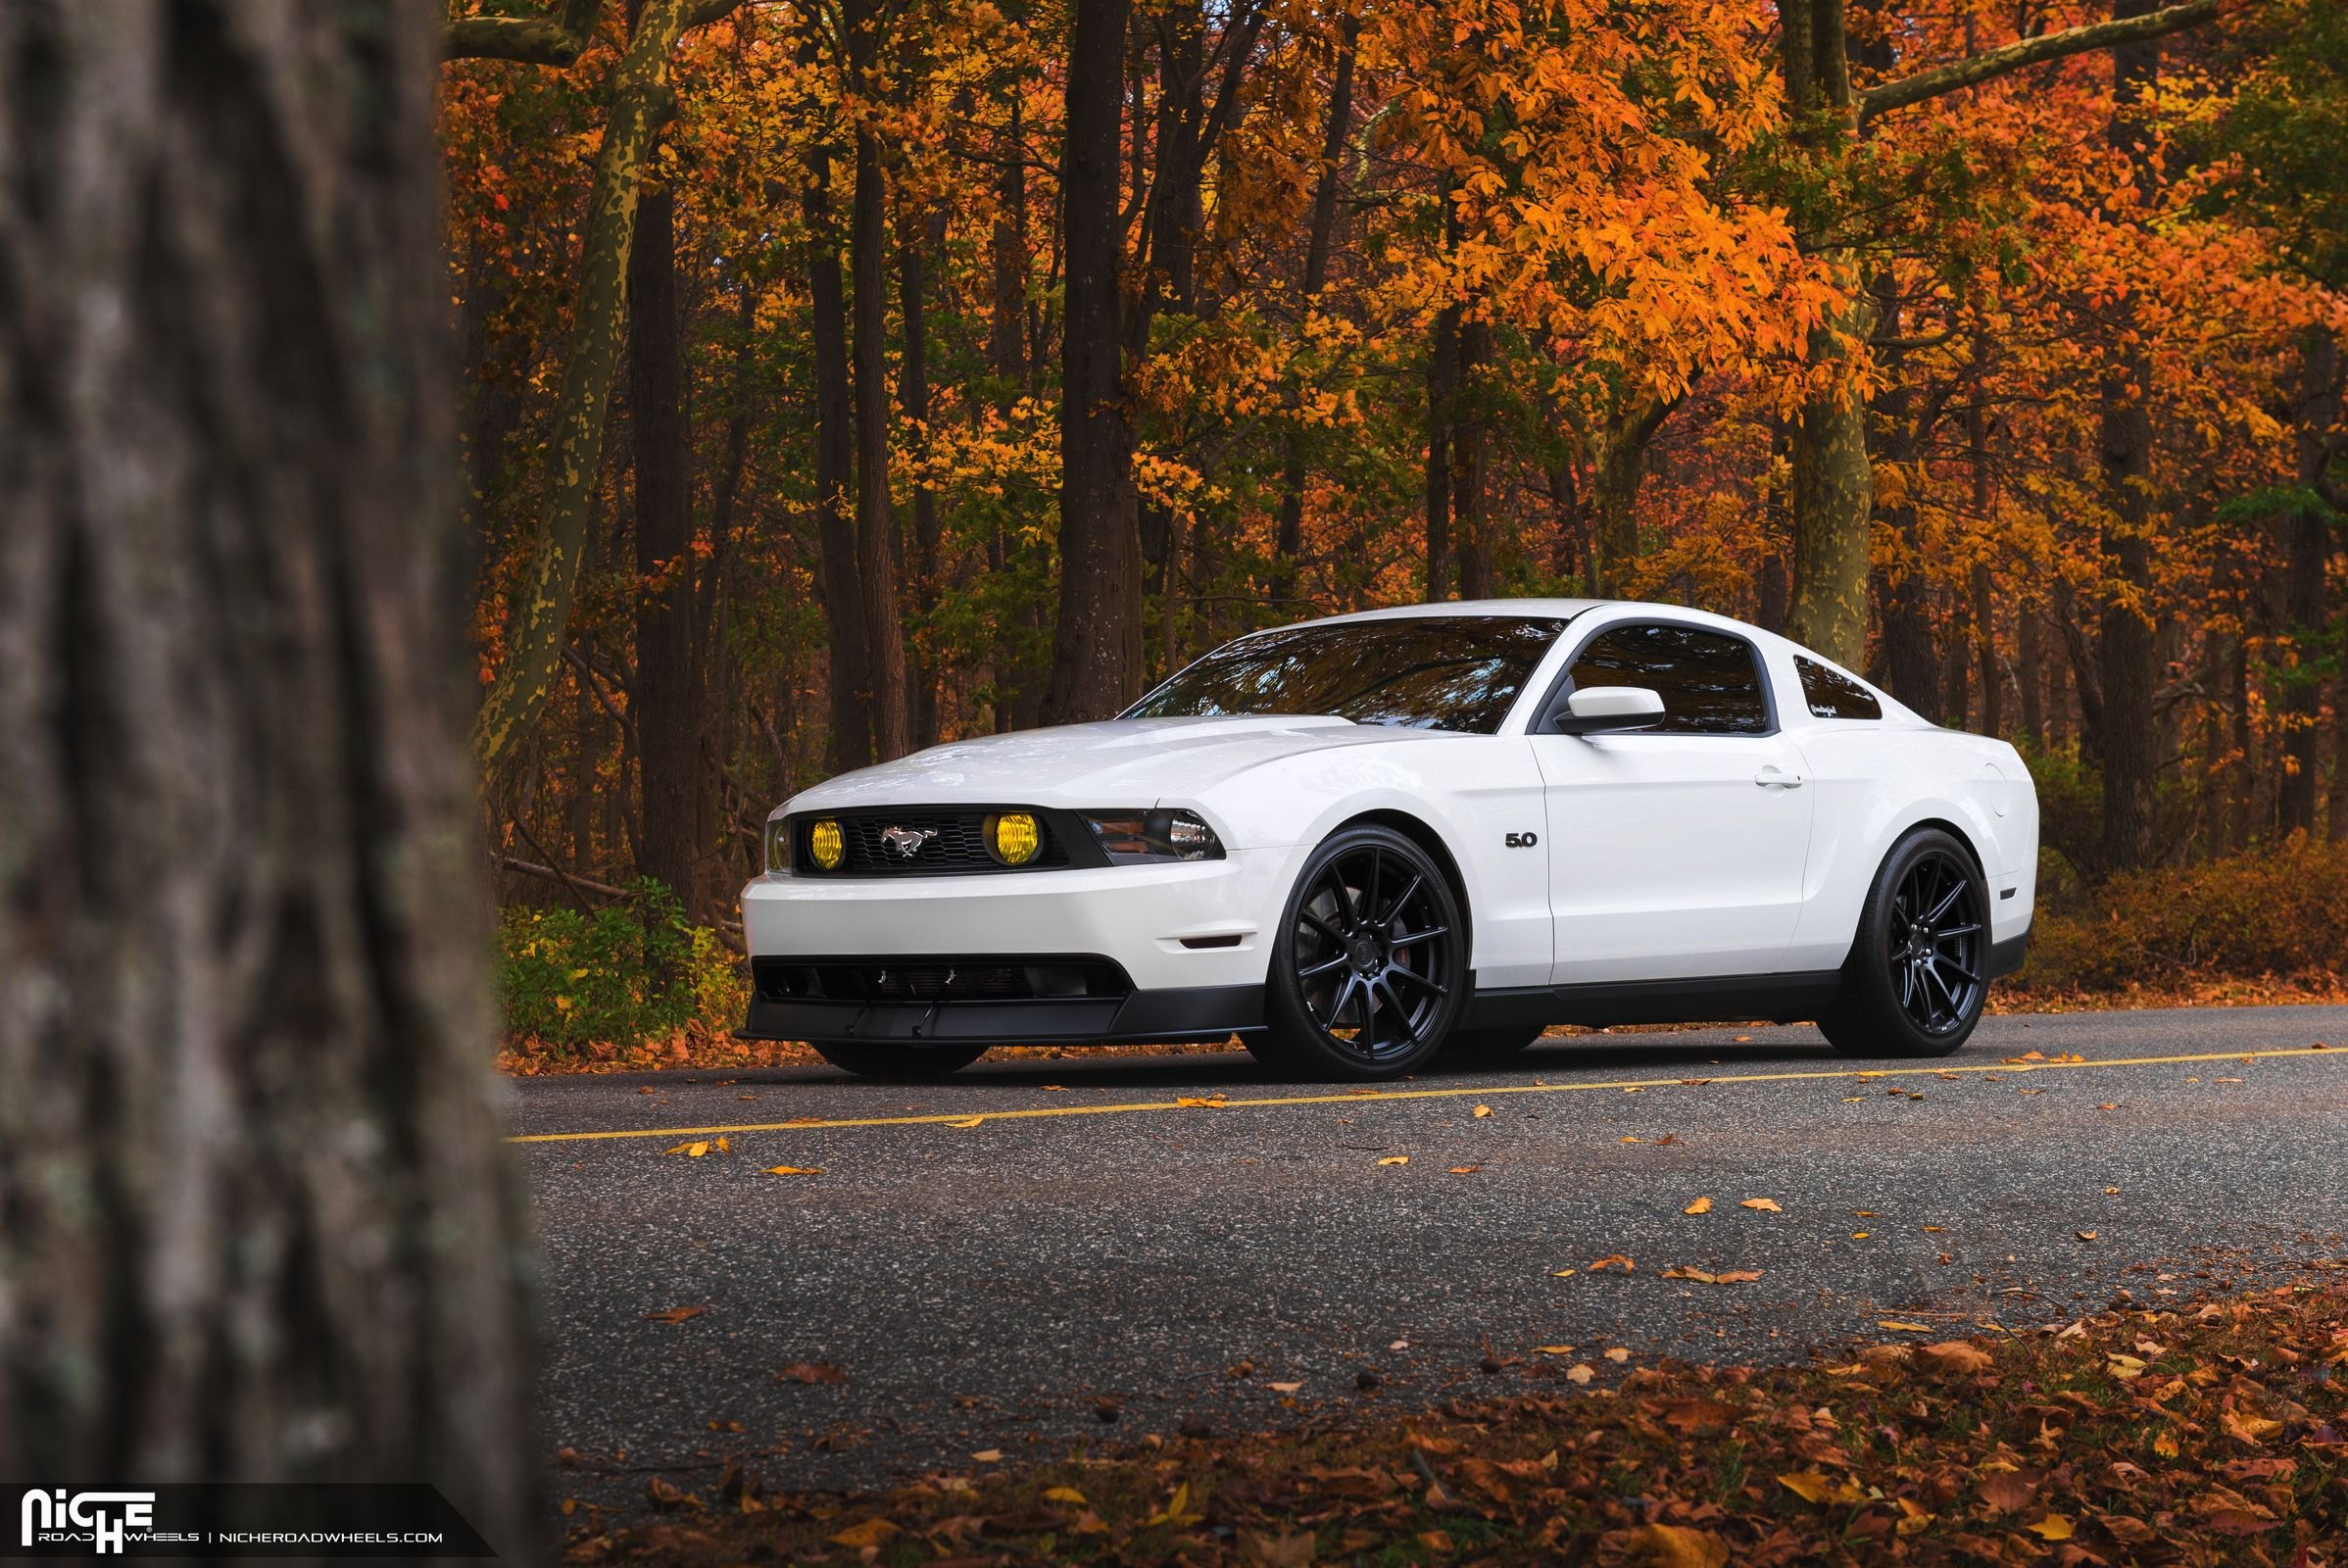 Aftermarket Yellow Fog Lights on White Ford Mustang - Photo by Niche